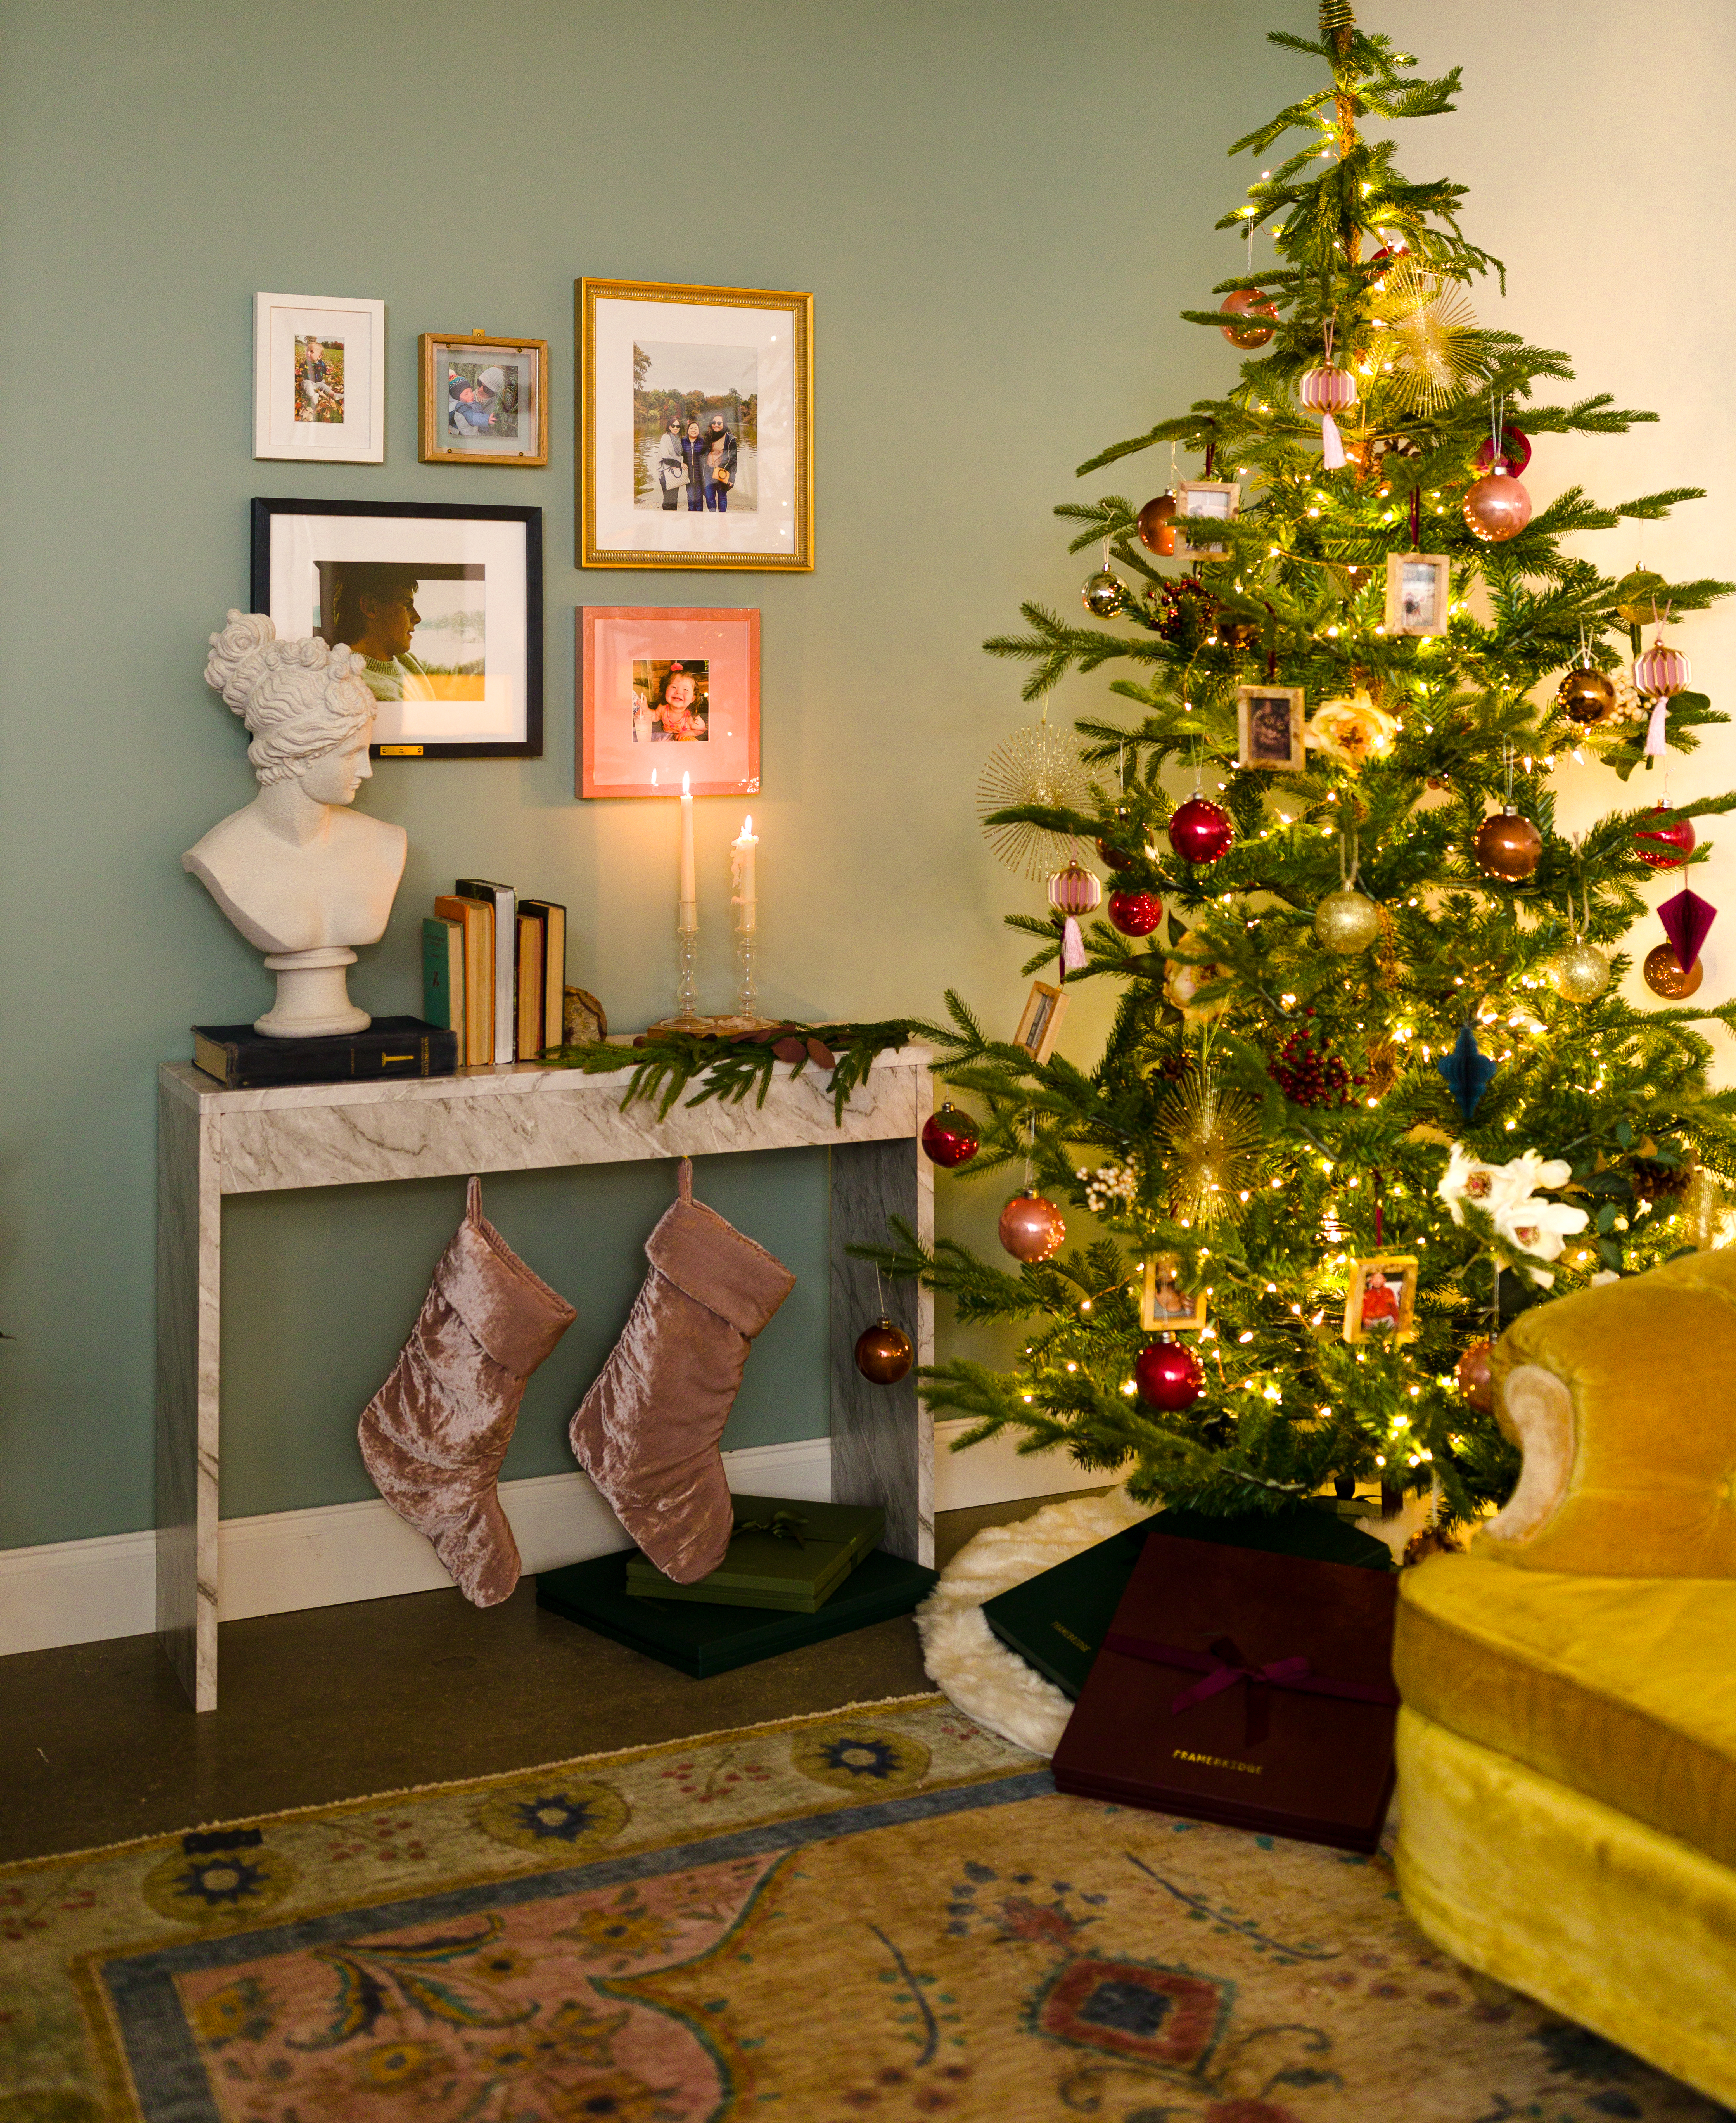 gallery wall over mantle with stocking, next to christmas tree